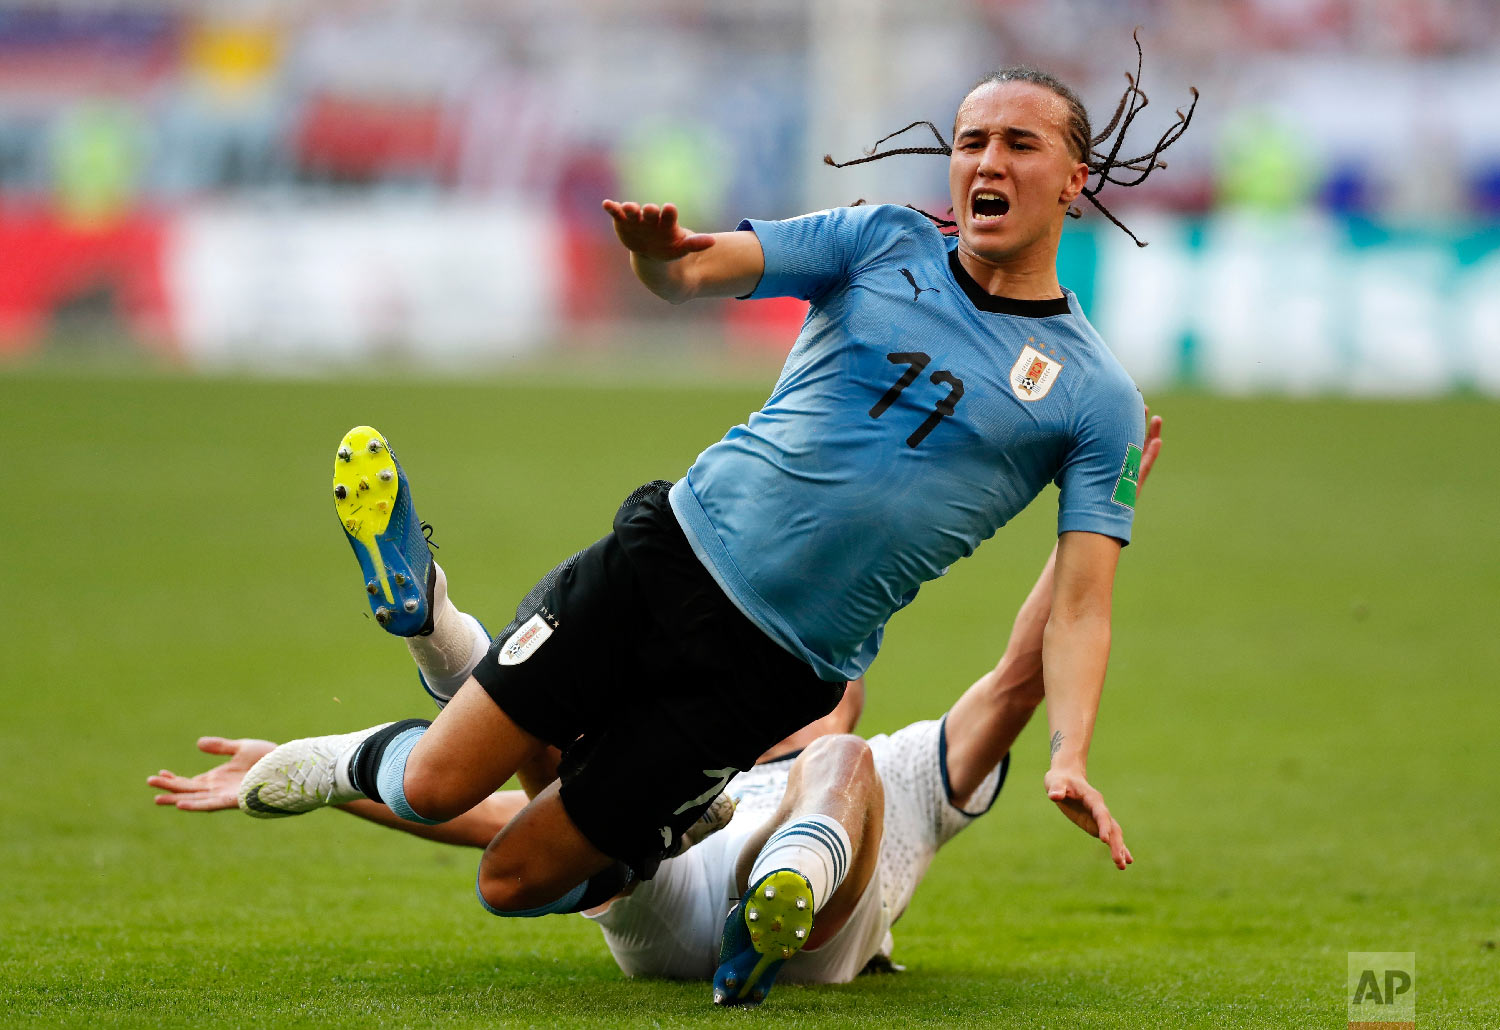  Russia's Igor Smolnikov stops Uruguay's Diego Laxalt during the group A match between Uruguay and Russia at the 2018 soccer World Cup at the Samara Arena in Samara, Russia on June 25, 2018. (AP Photo/Rebecca Blackwell) 